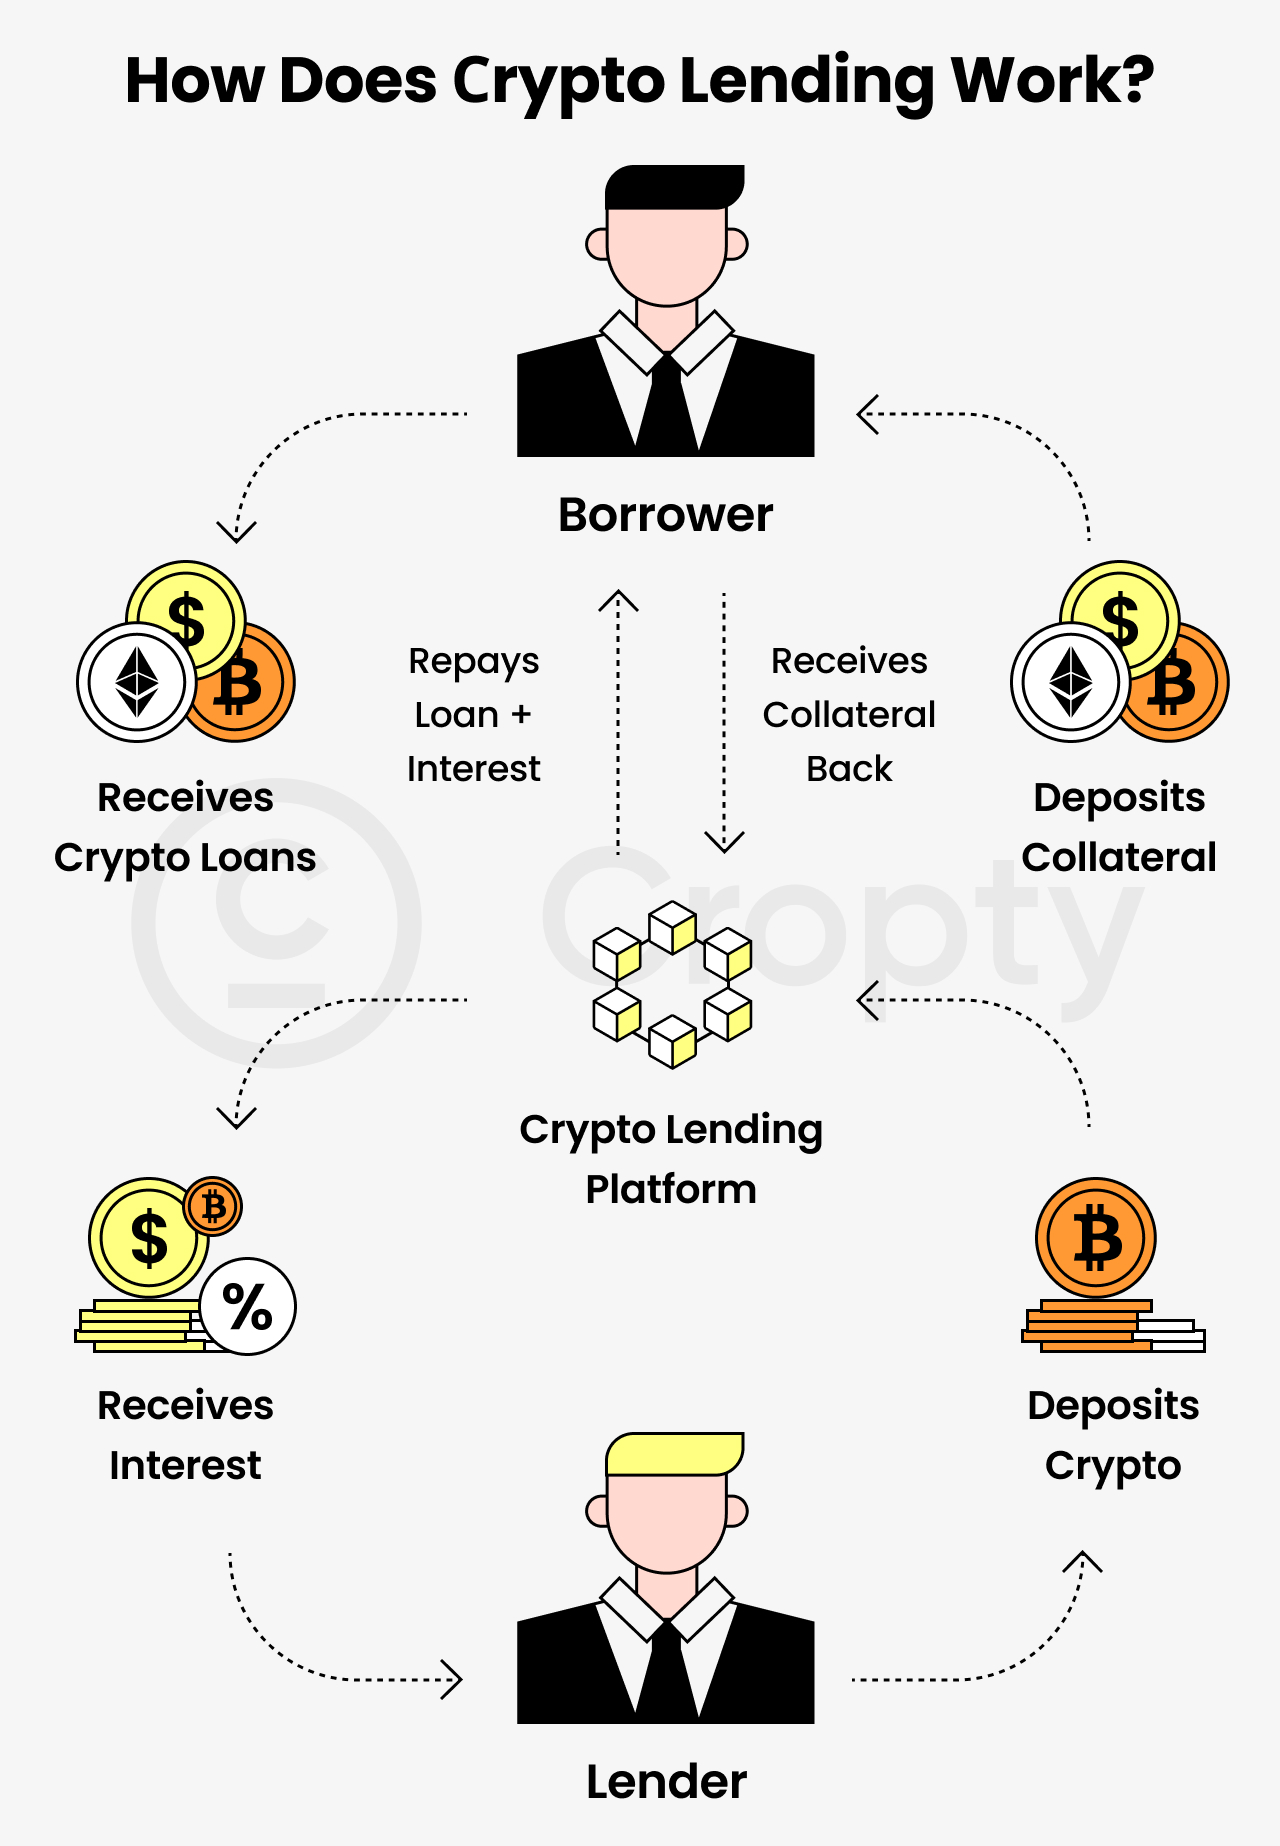 an icon of a borrower, an icon of a crypto lending platform, an icon of a lender, an icon of a coin of dollar, an icon of a coin of ethereum, an icon of a coin of bitoin